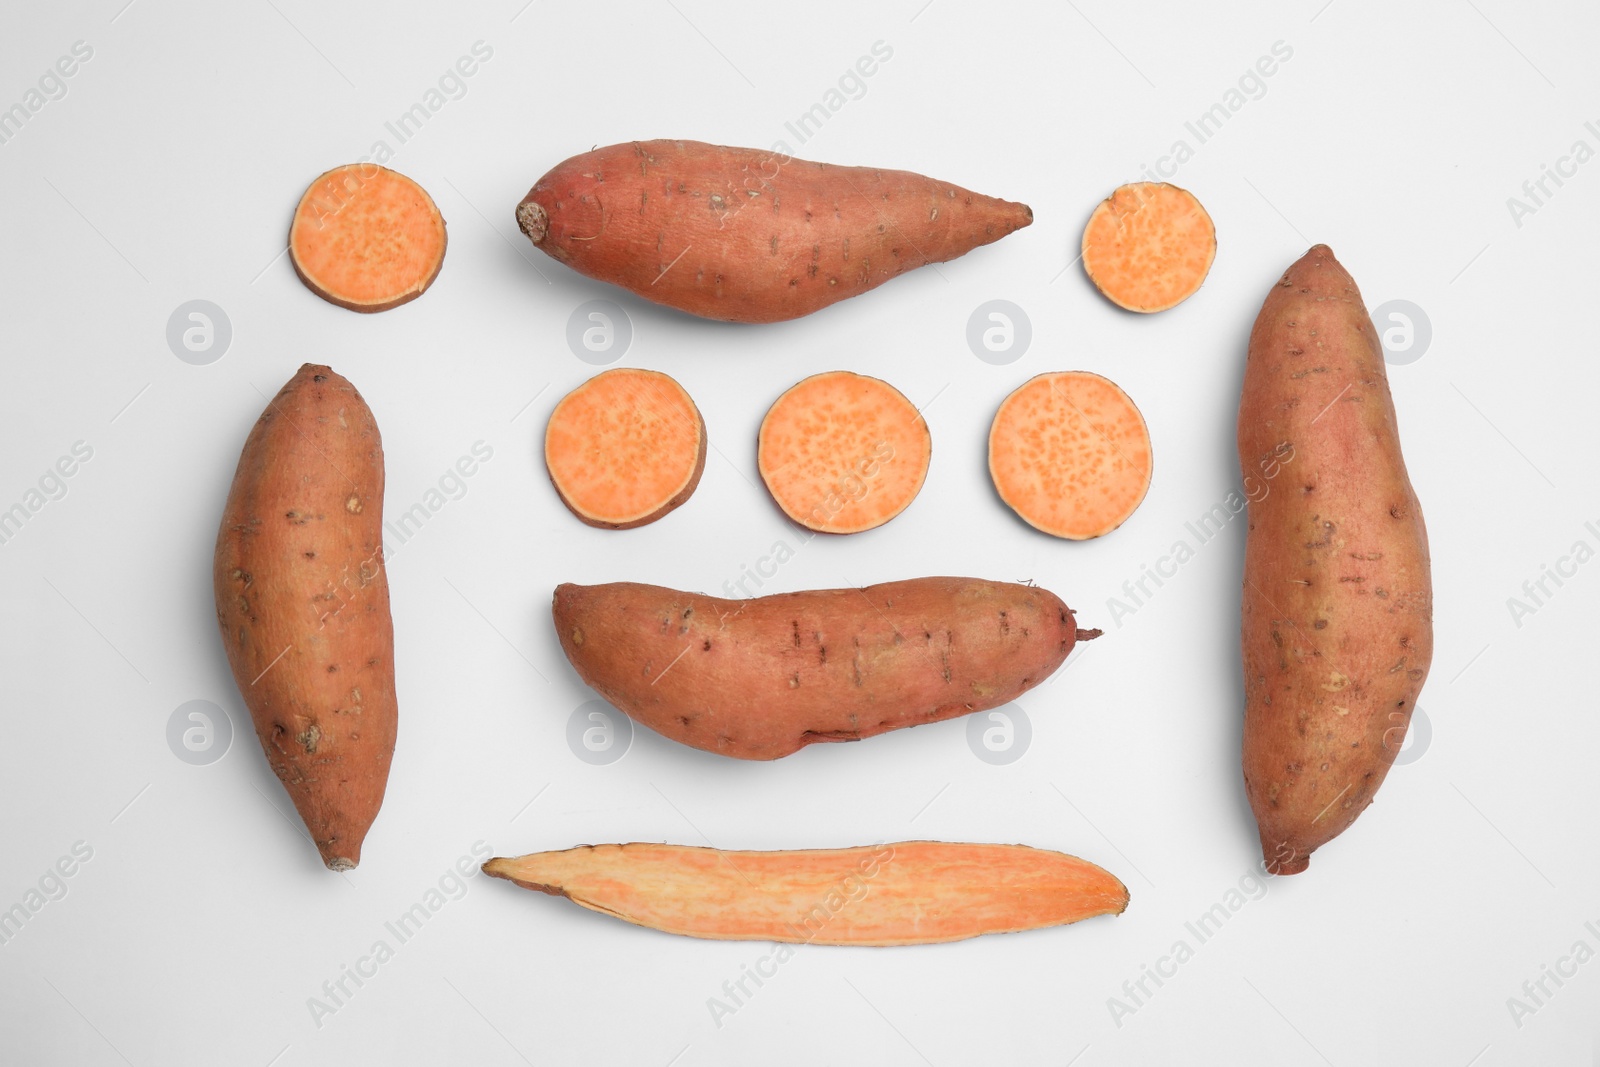 Photo of Cut and whole sweet potatoes on white background, top view